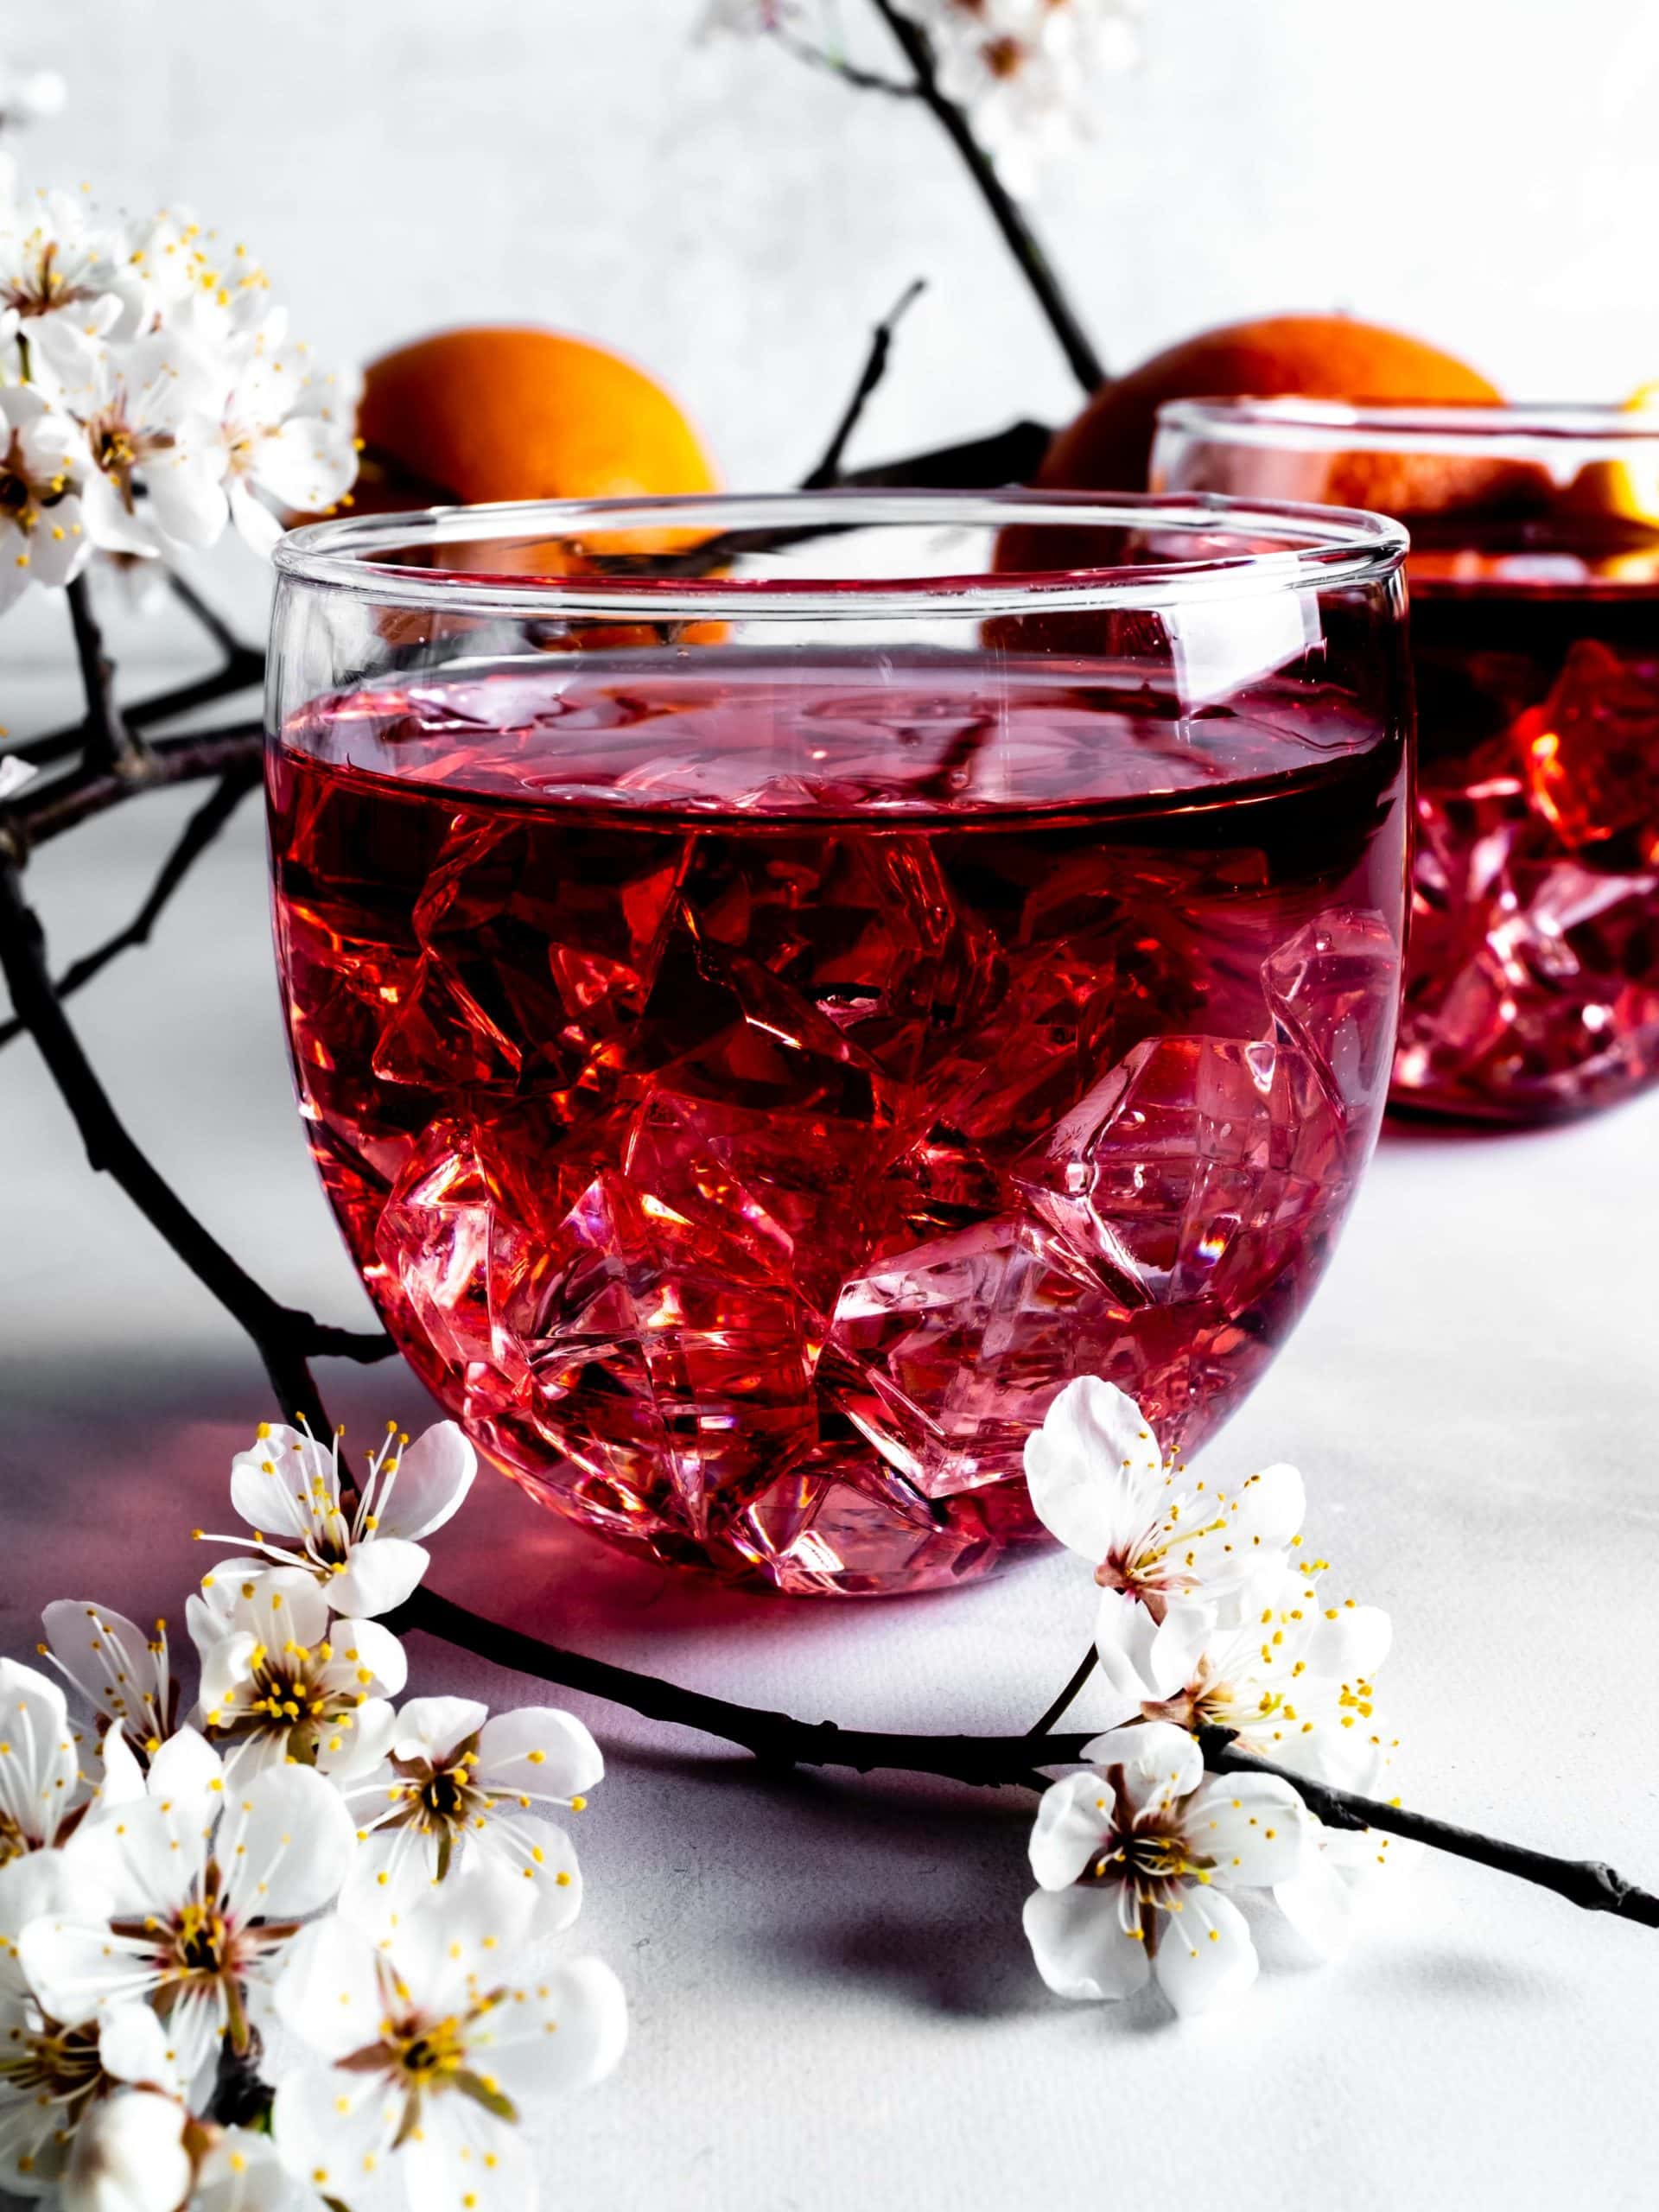 orange infused wine with ice and small flowers